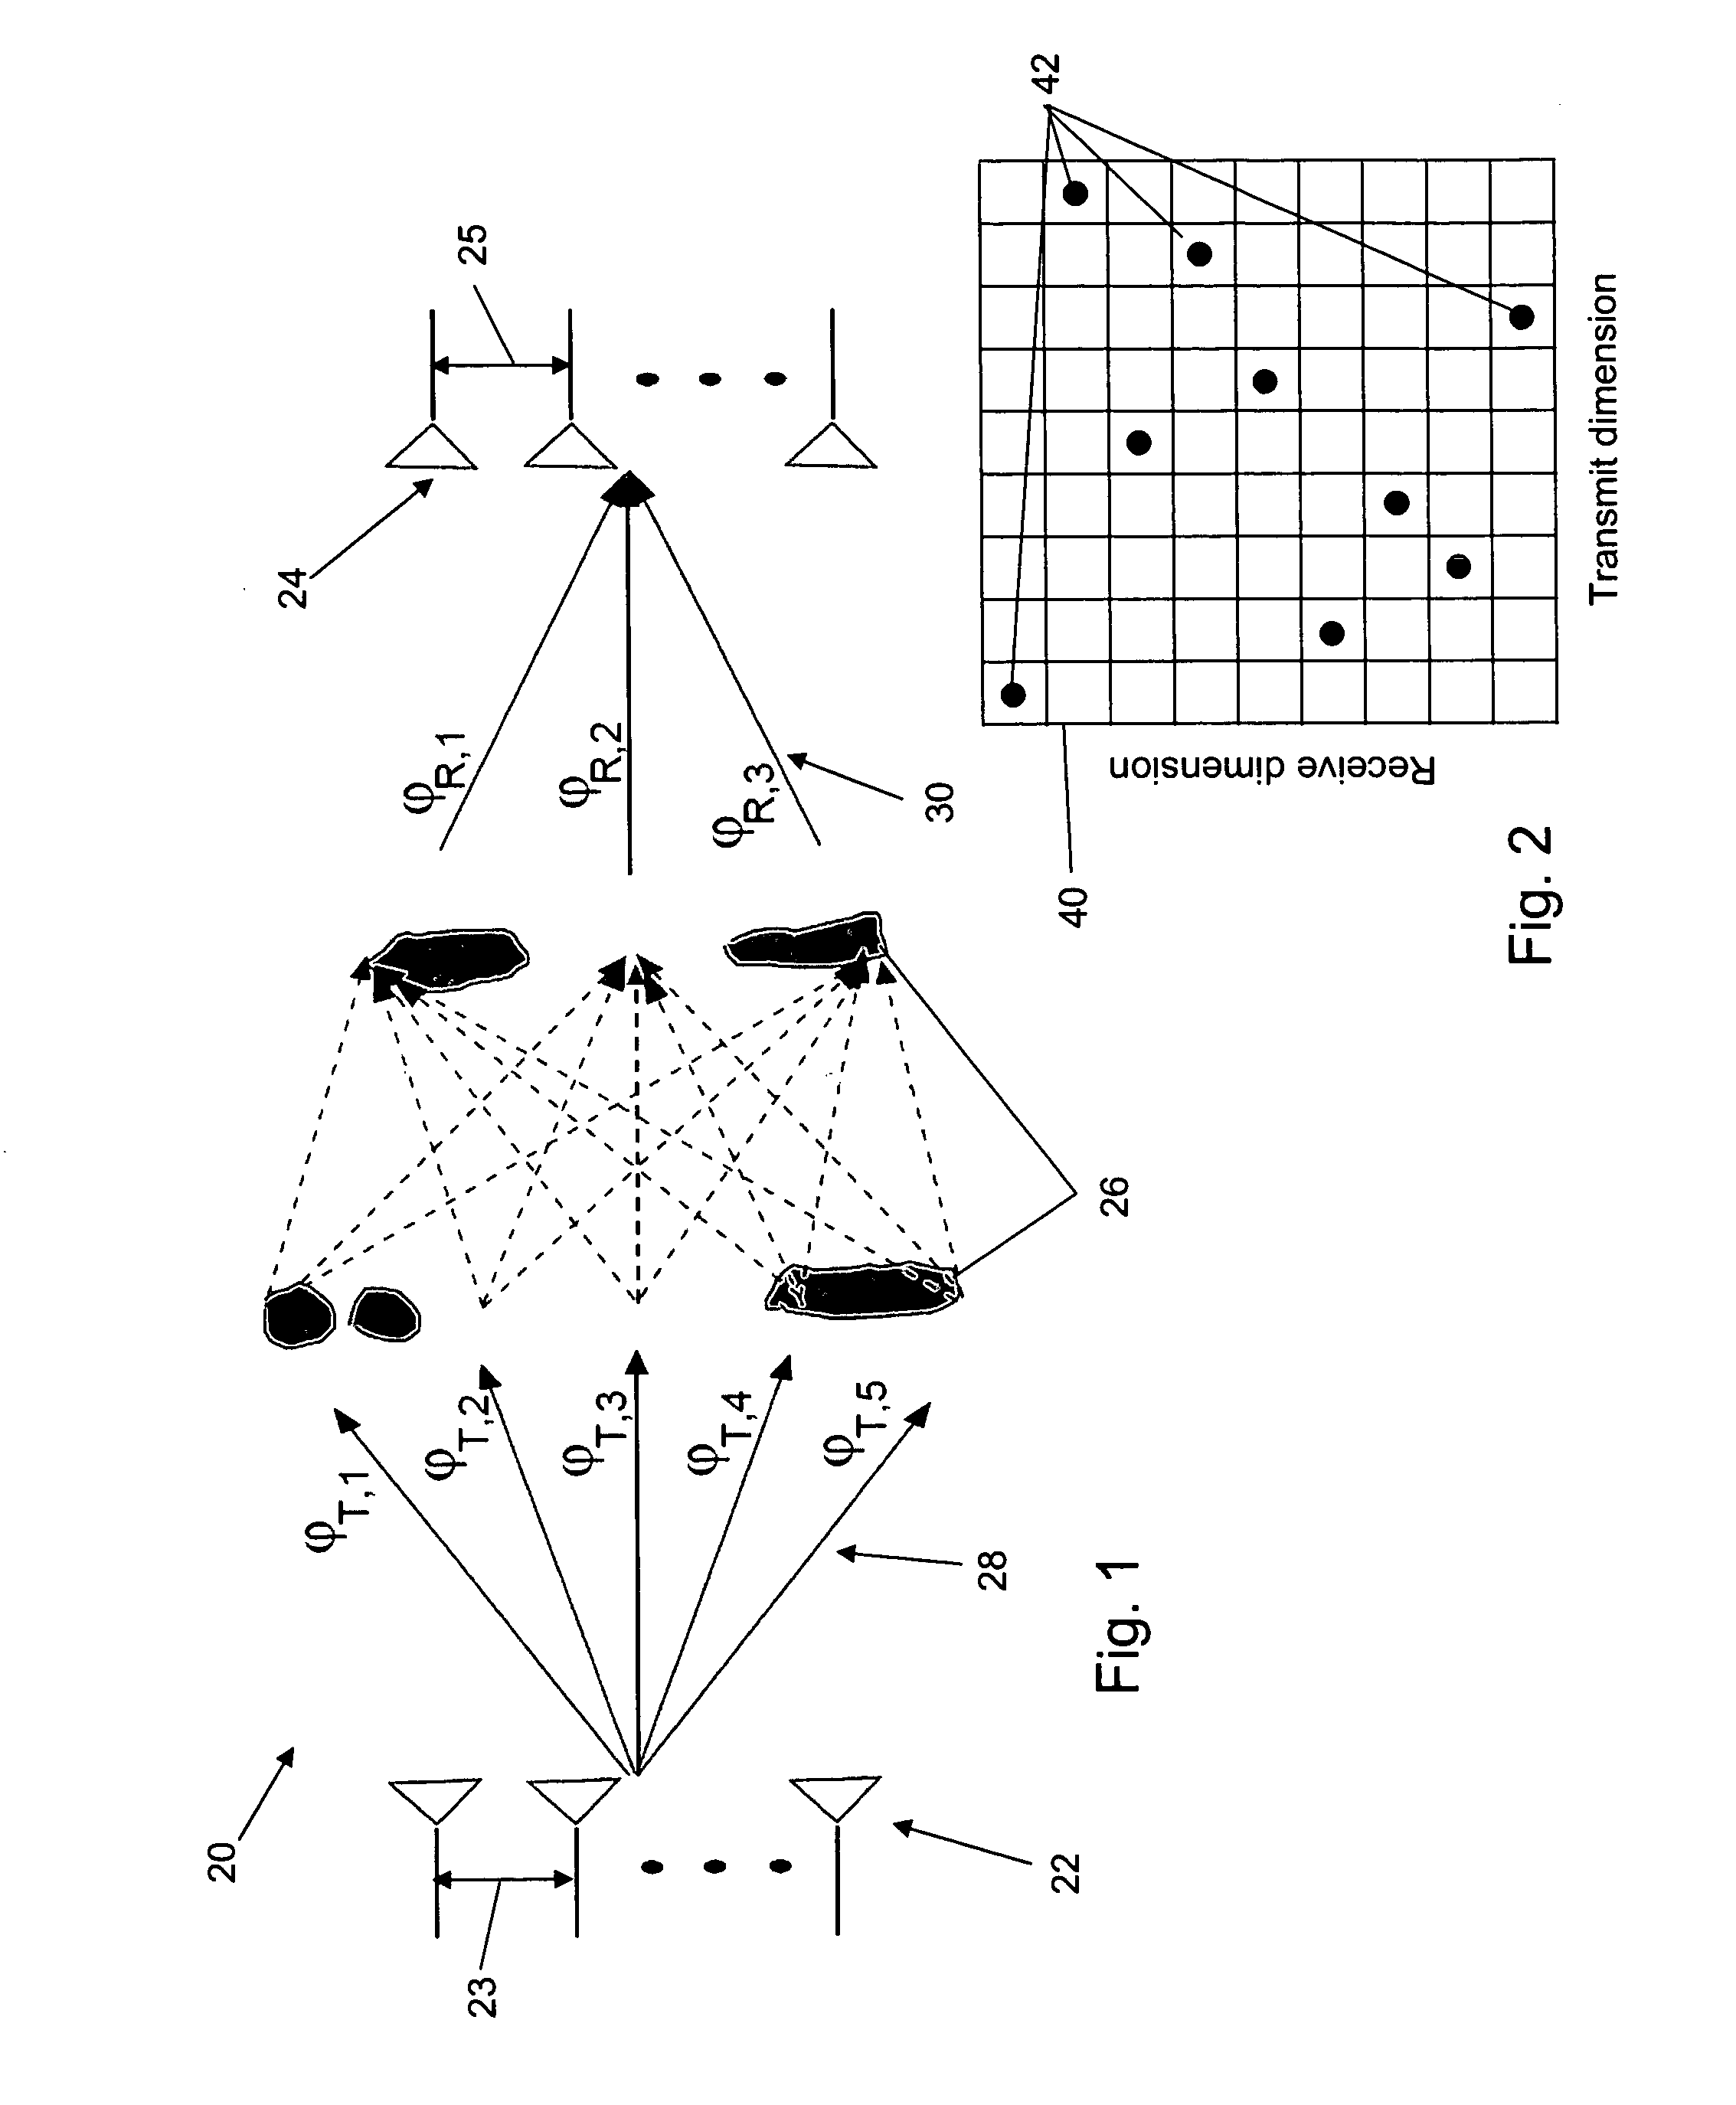 Method and system for improving performance in a sparse multi-path environment using reconfigurable arrays